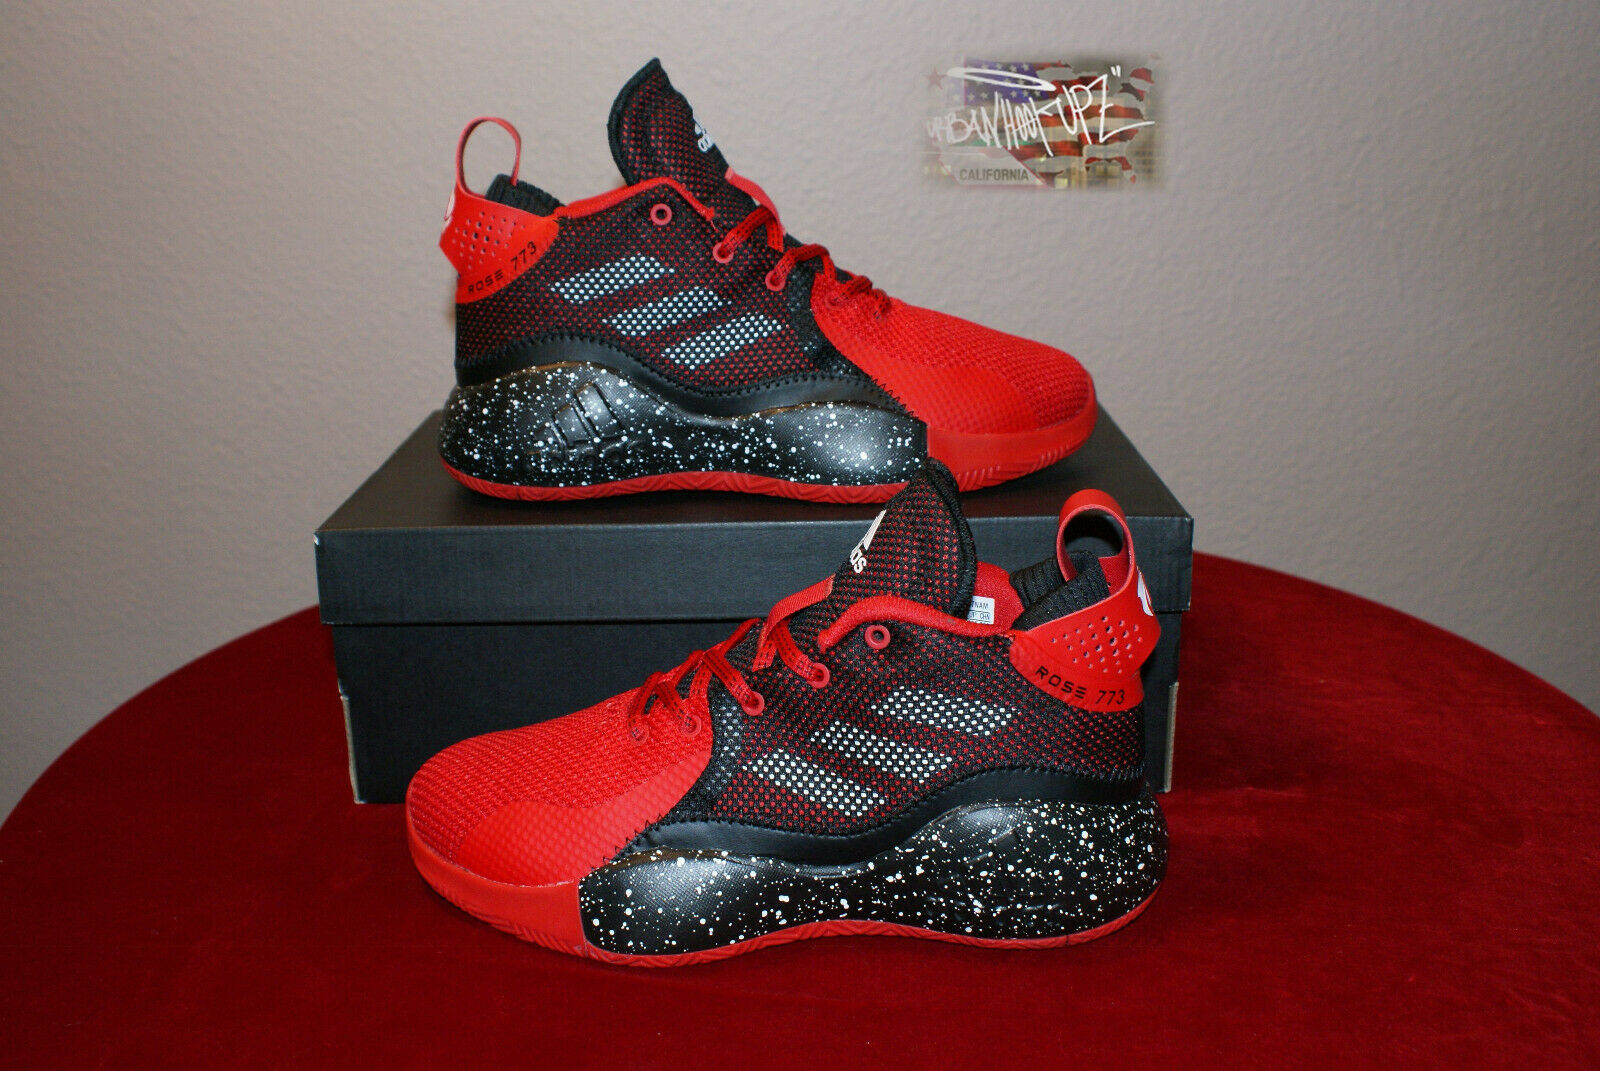 Adidas D Rose 773 2020 Basketball Shoes FW8788 Black & Red Youth BOYS Size 5